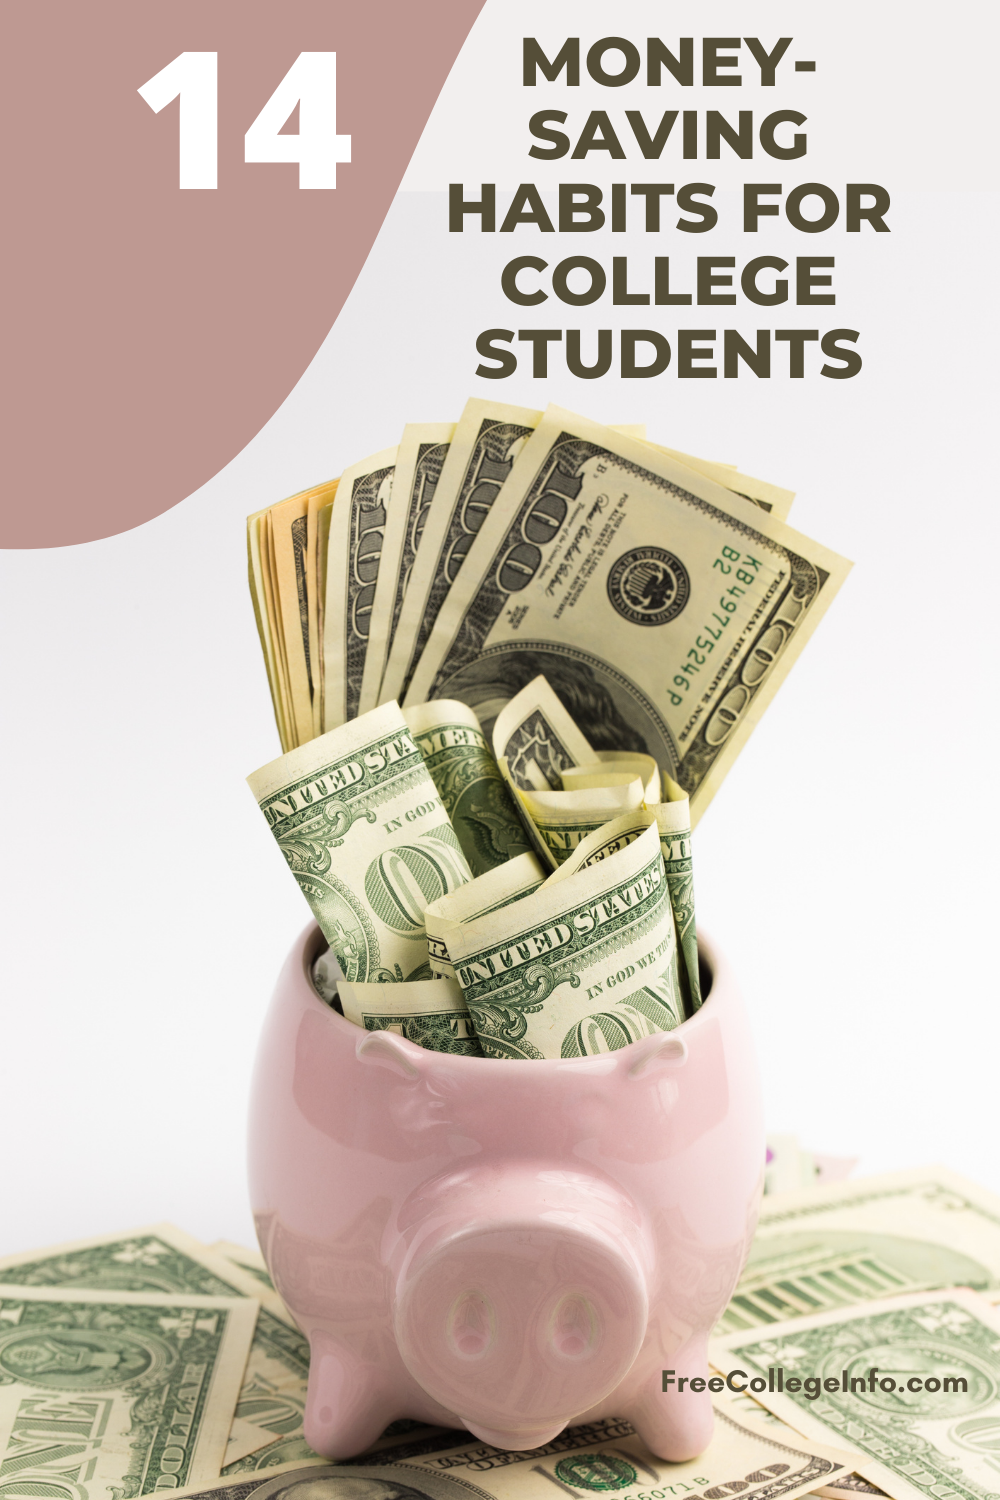 Money-Saving Habits For College Students